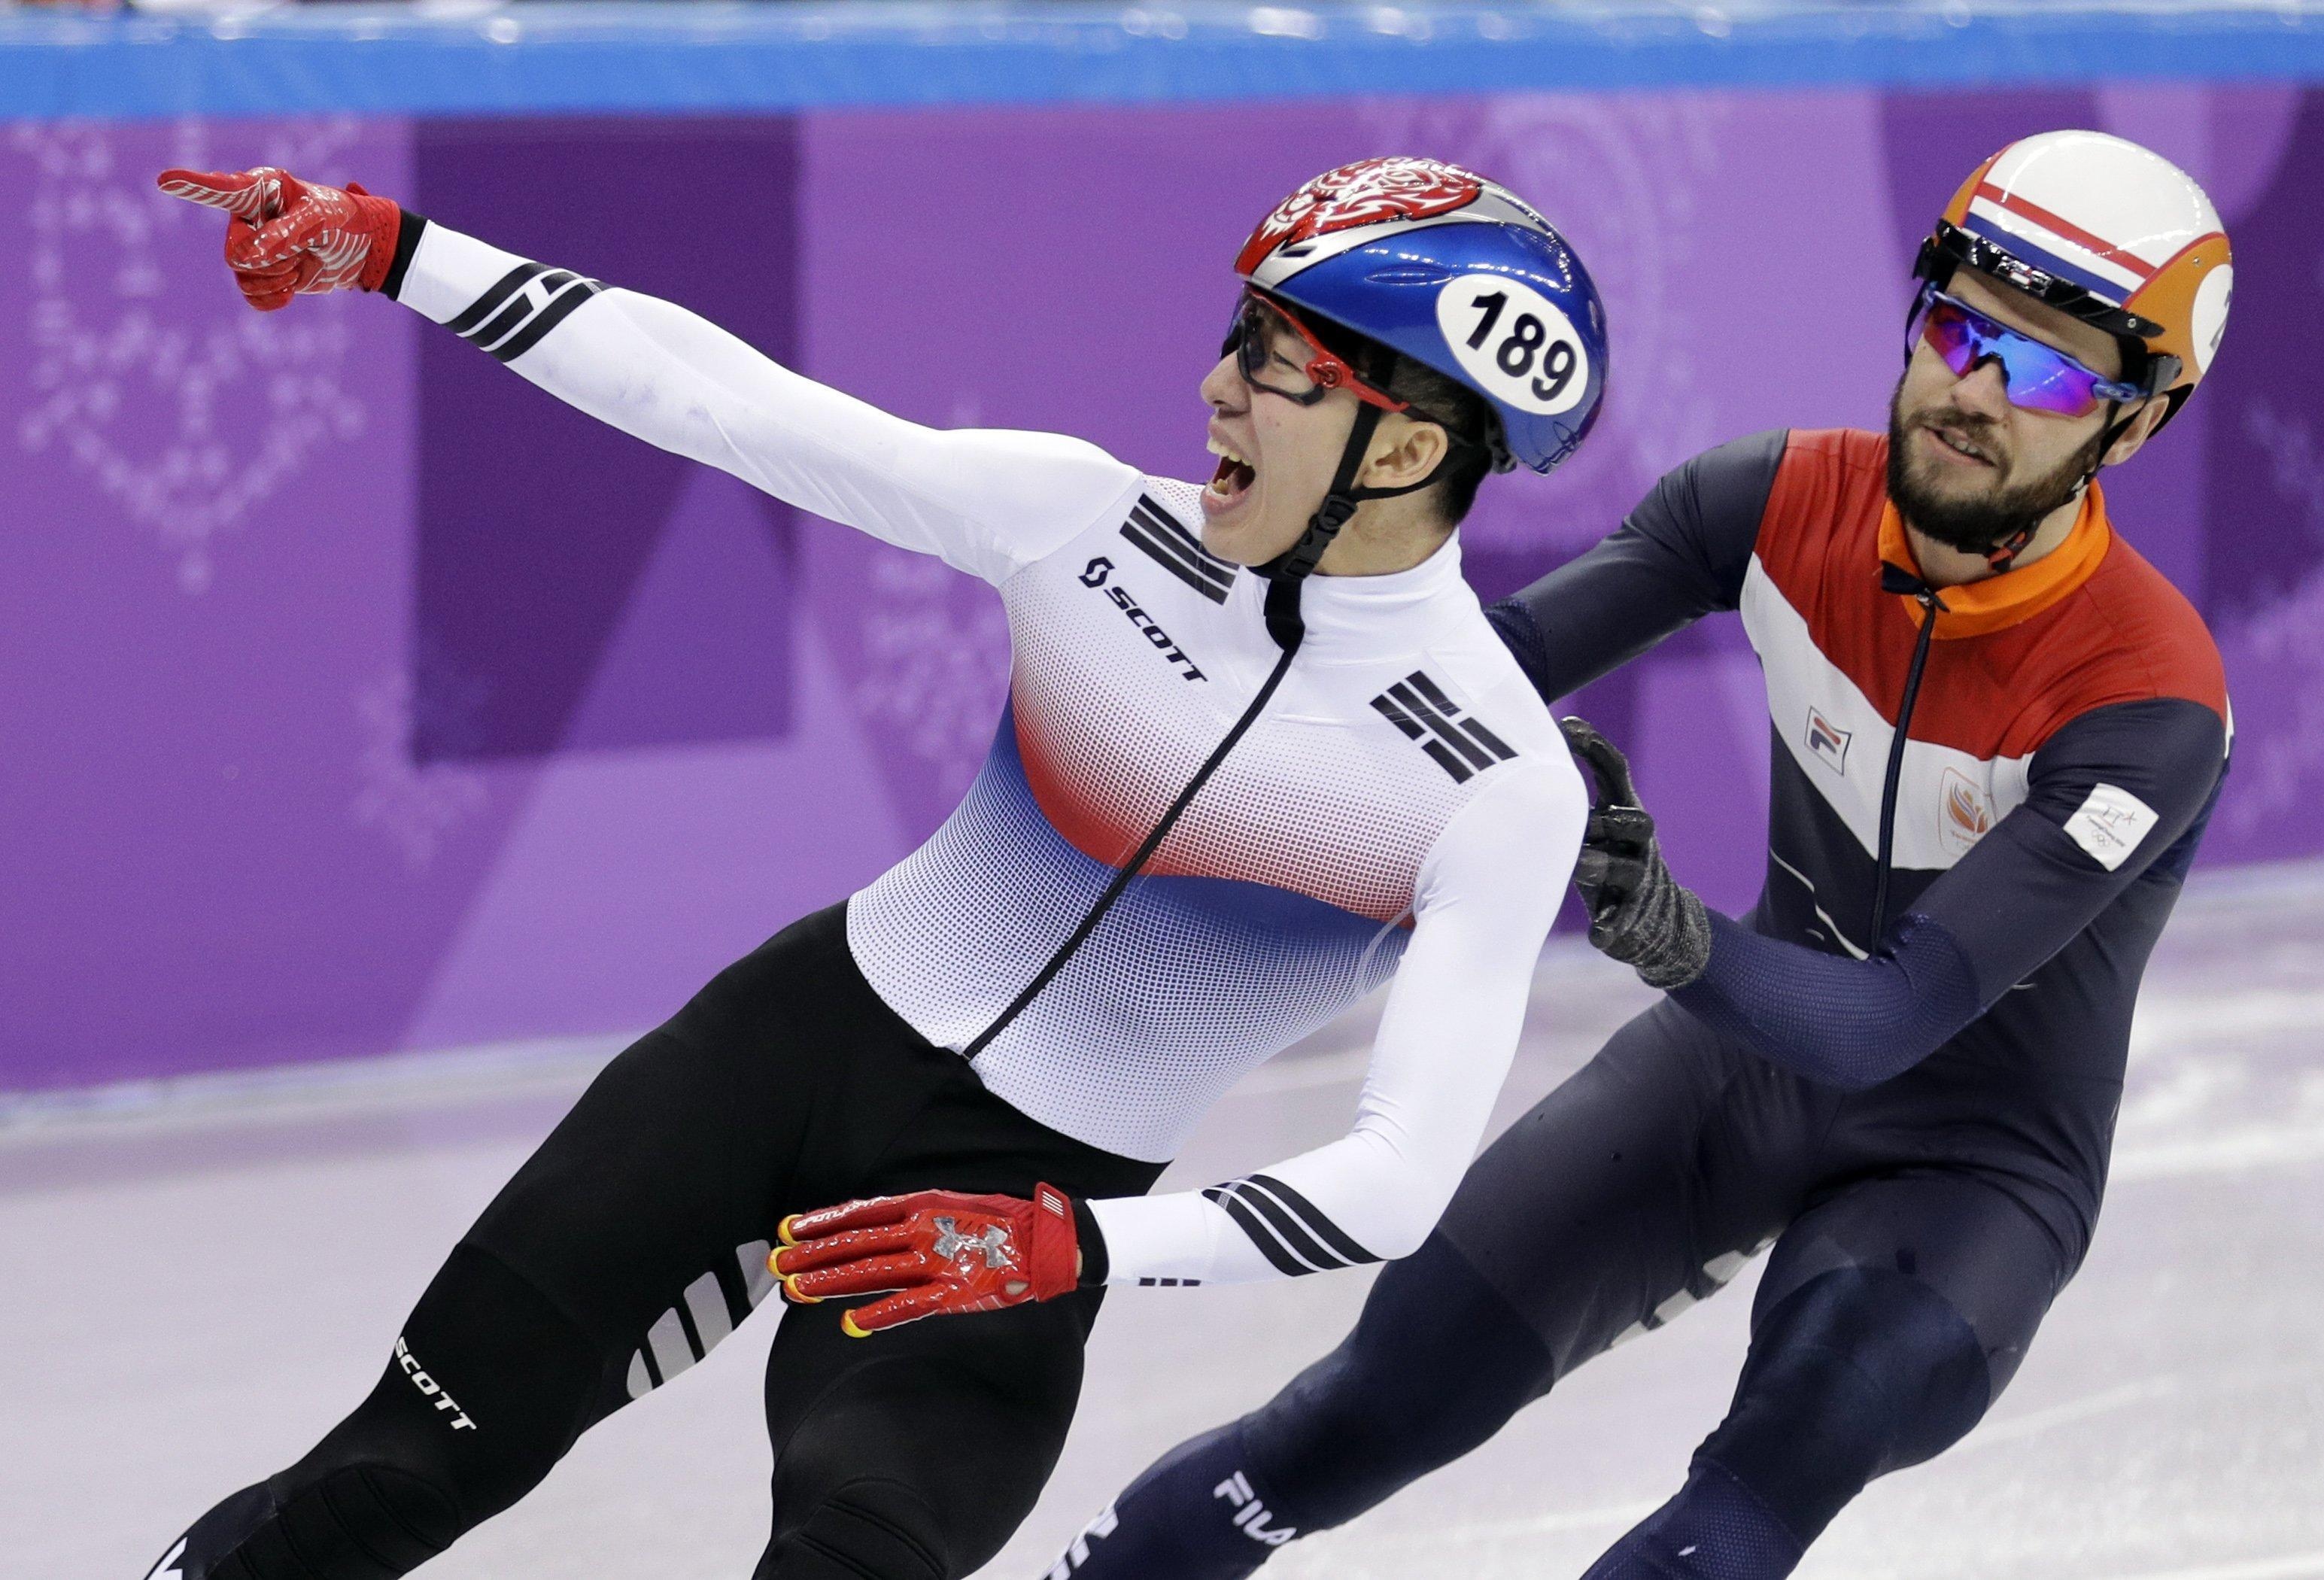 Winter Olympics speed skater, Sjinkie Knegt's controversy, Middle finger incident, Winter sports drama, 3090x2100 HD Desktop